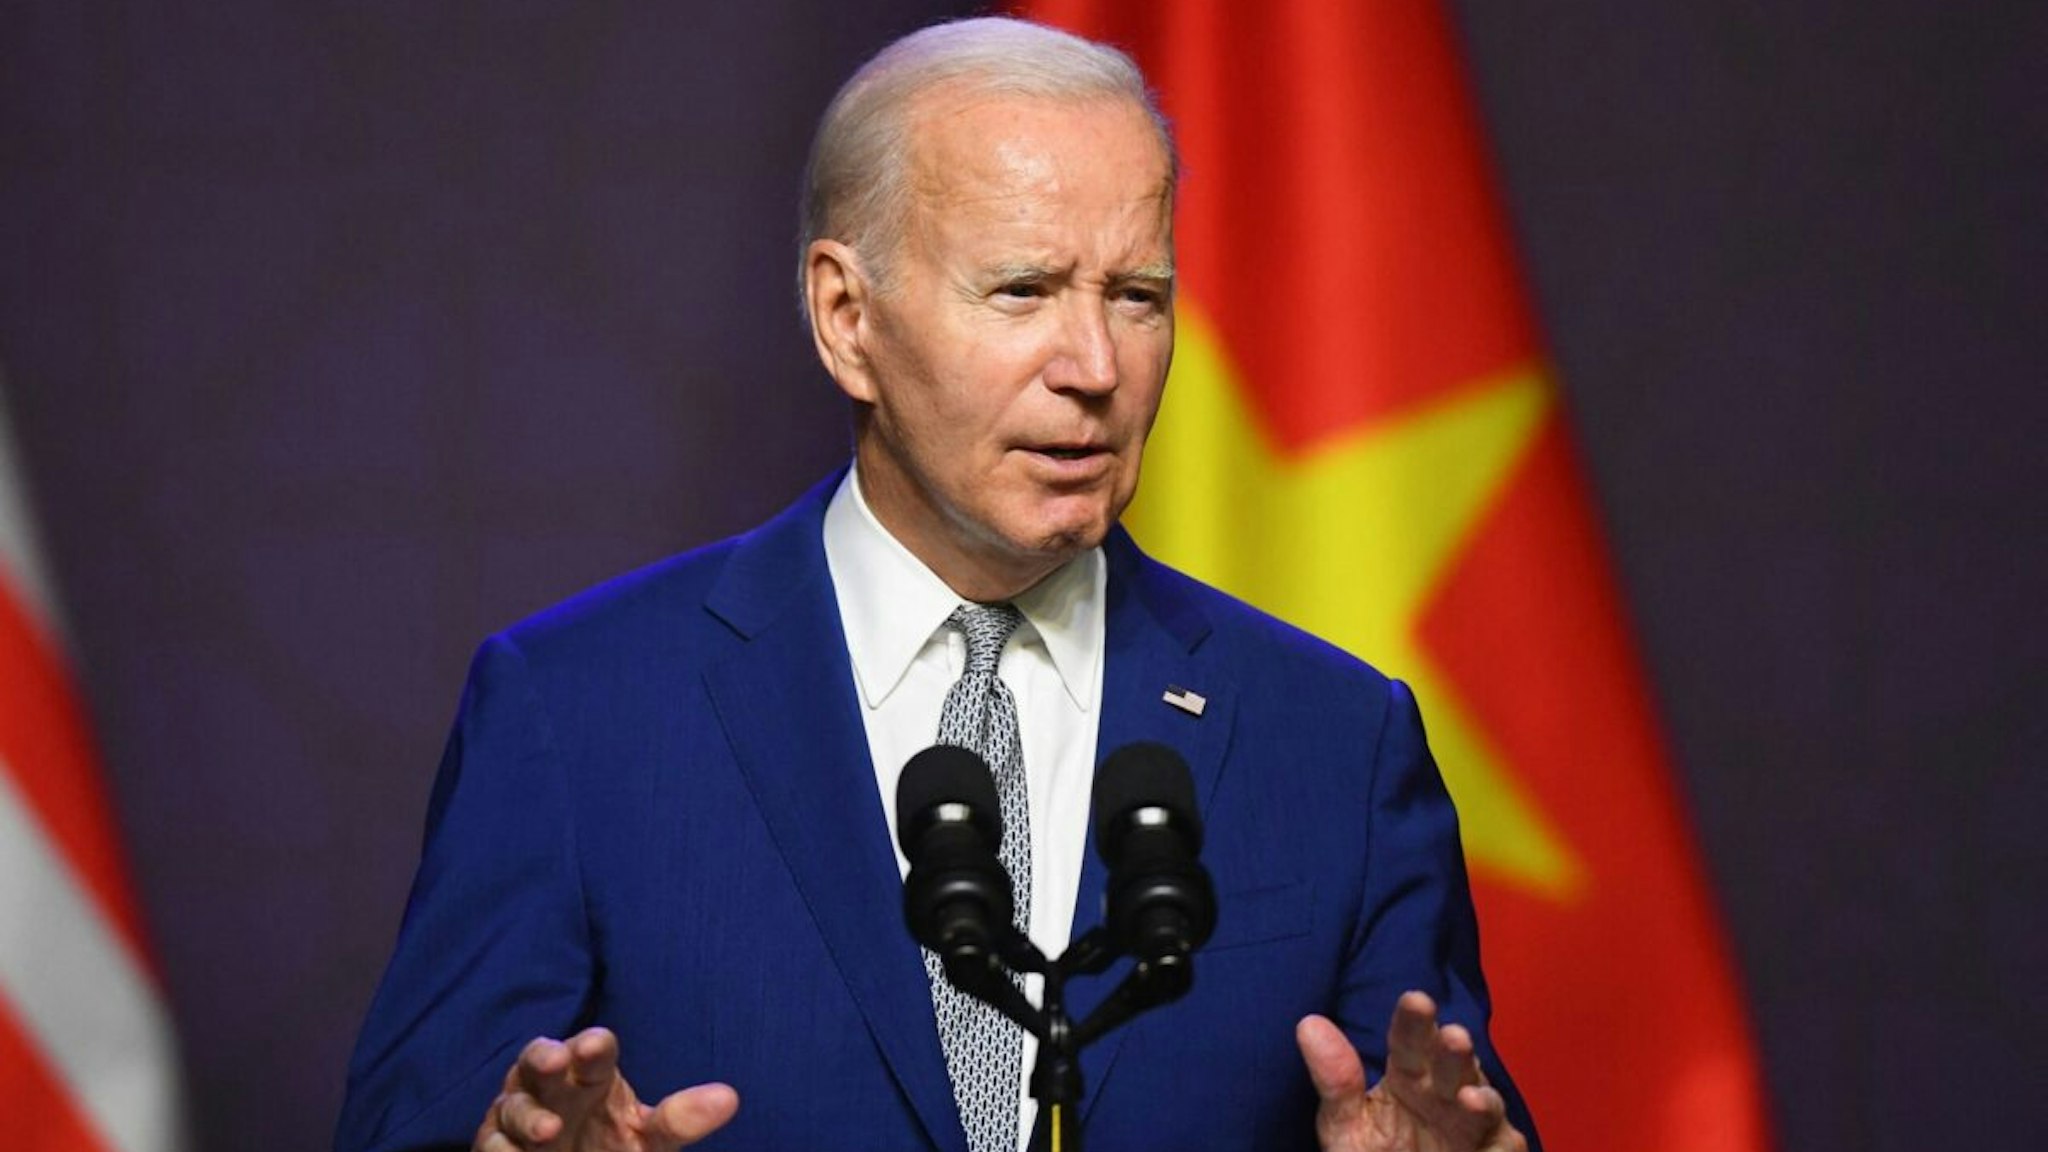 US President Joe Biden holds a press conference in Hanoi on September 10, 2023, on the first day of a visit in Vietnam. Biden travels to Vietnam to deepen cooperation between the two nations, in the face of China's growing ambitions in the region.